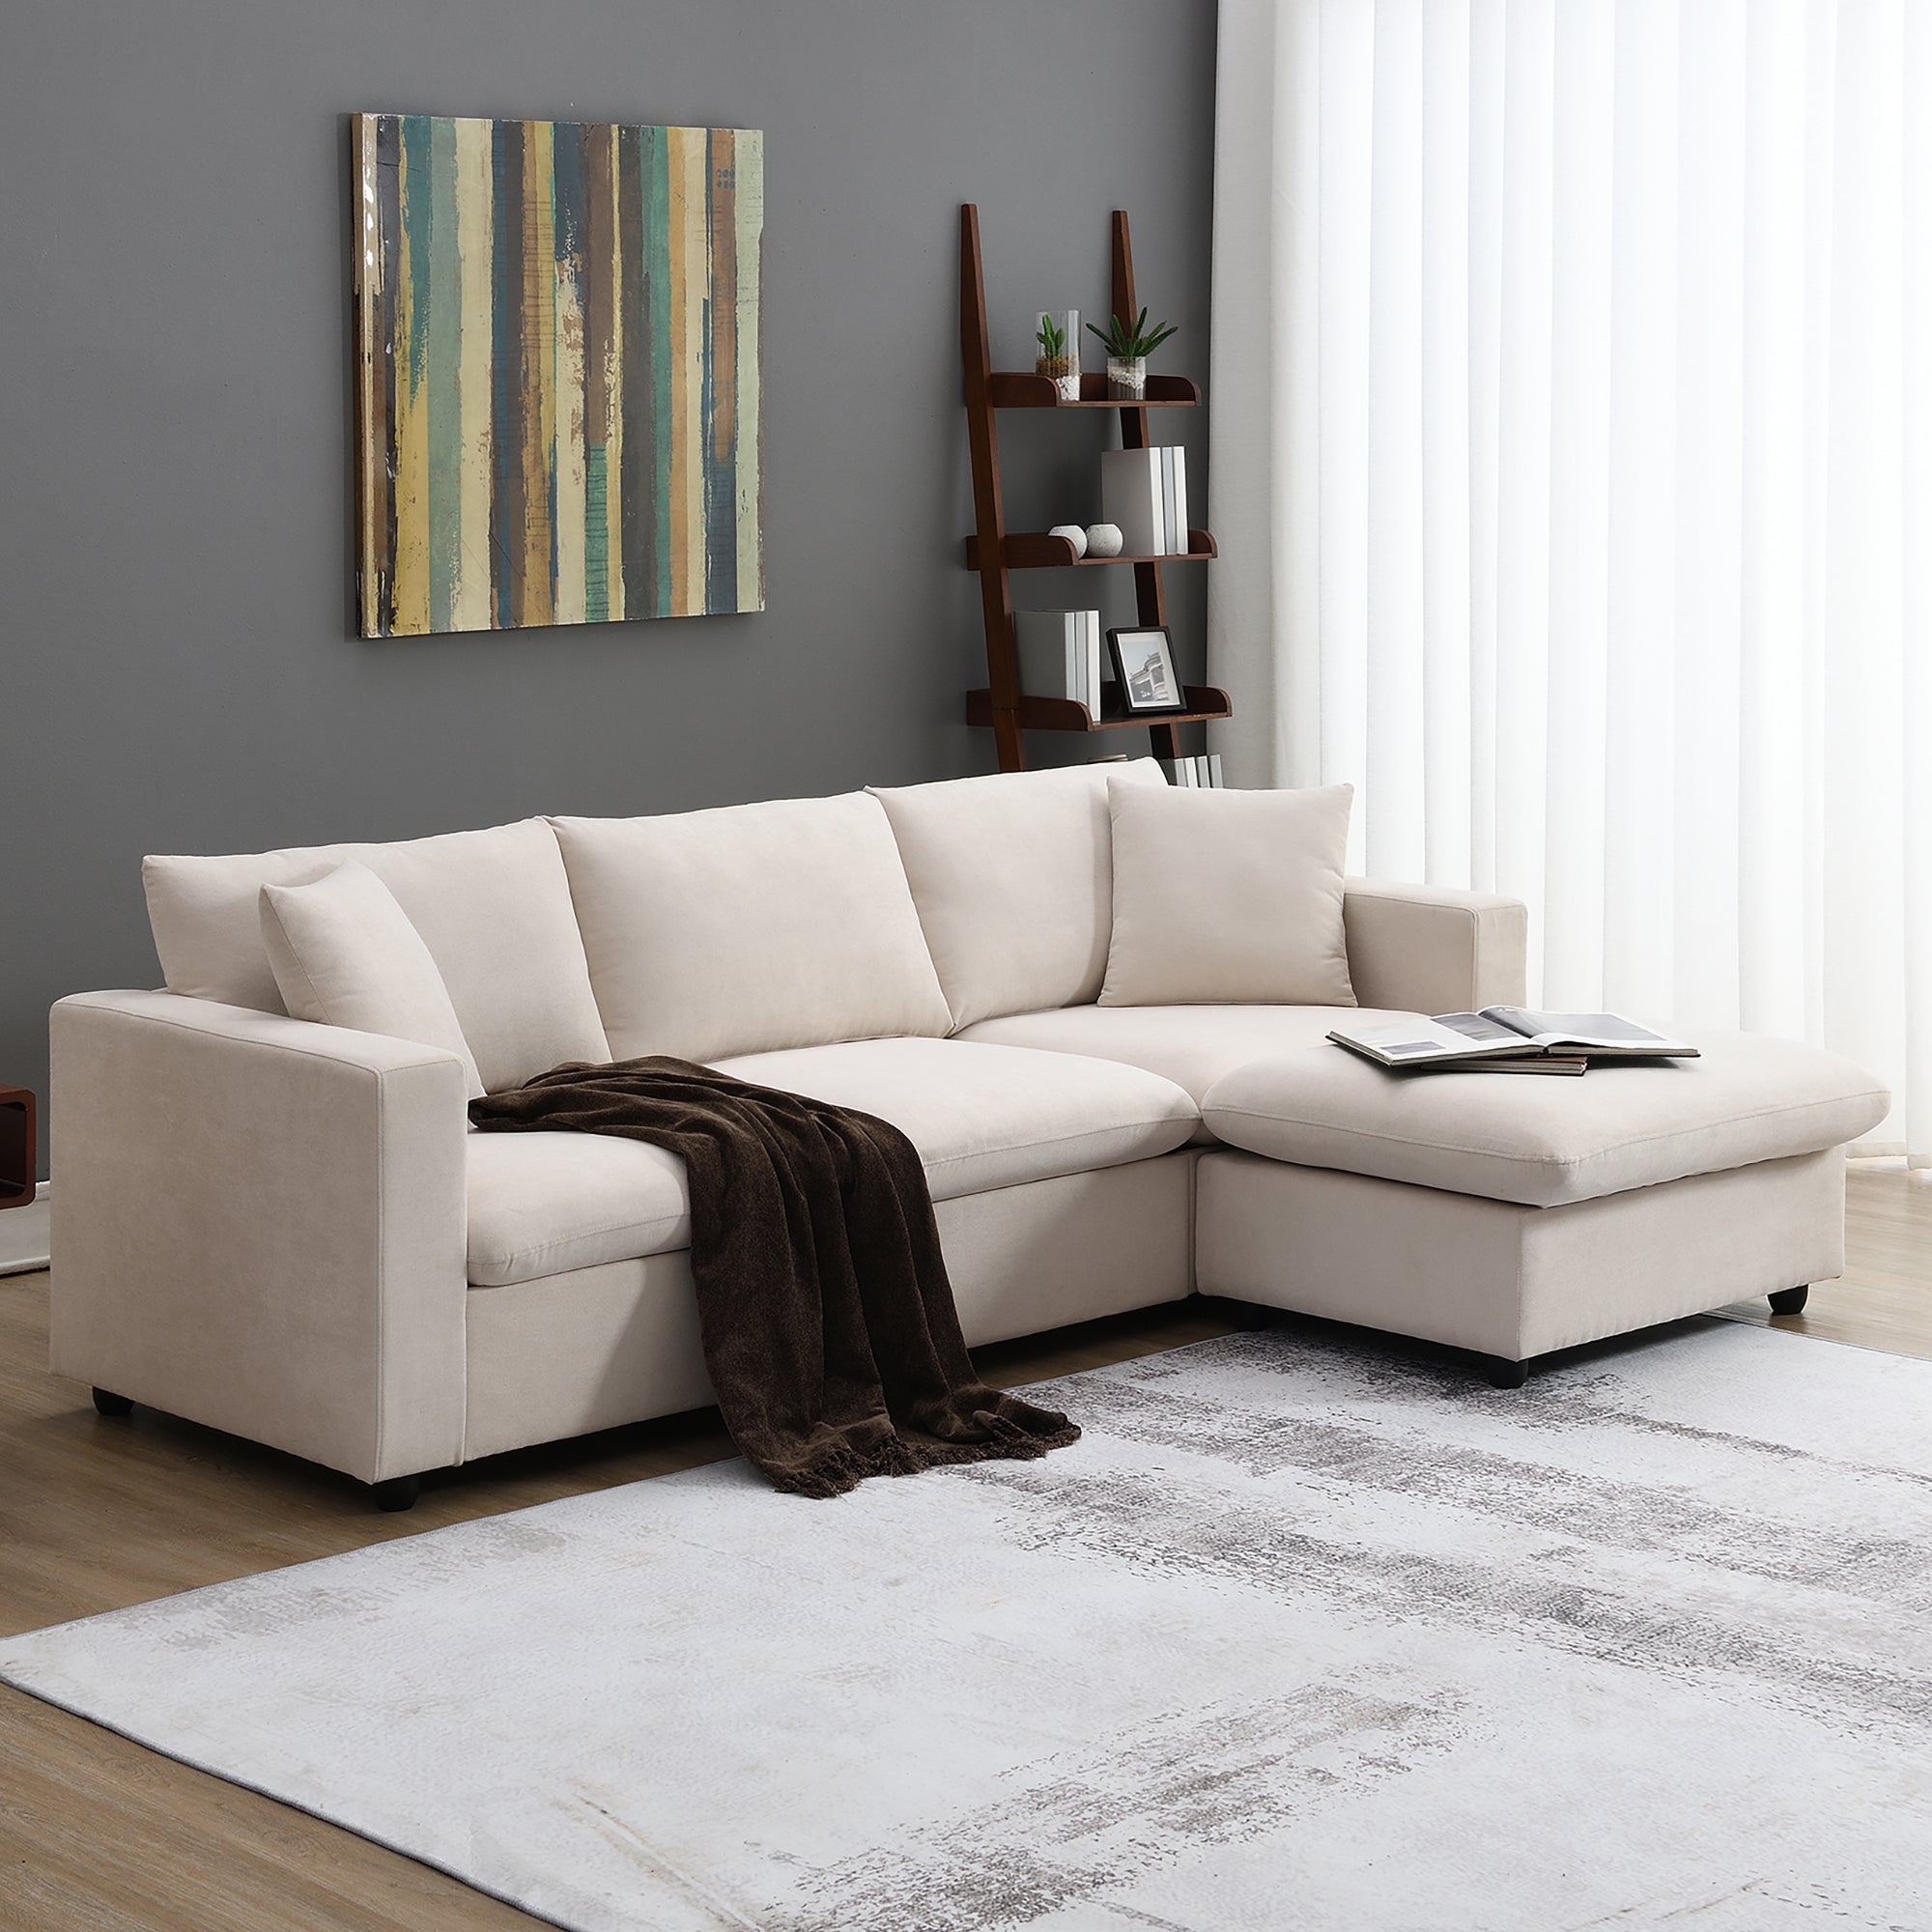 🆓🚛 100.4" Modern Sectional Sofa, L-Shaped Couch Set With 2 Free Pillows, 4-Seat Polyester Fabric Couch Set With Convertible Ottoman for Living Room, Apartment, Office, Beige